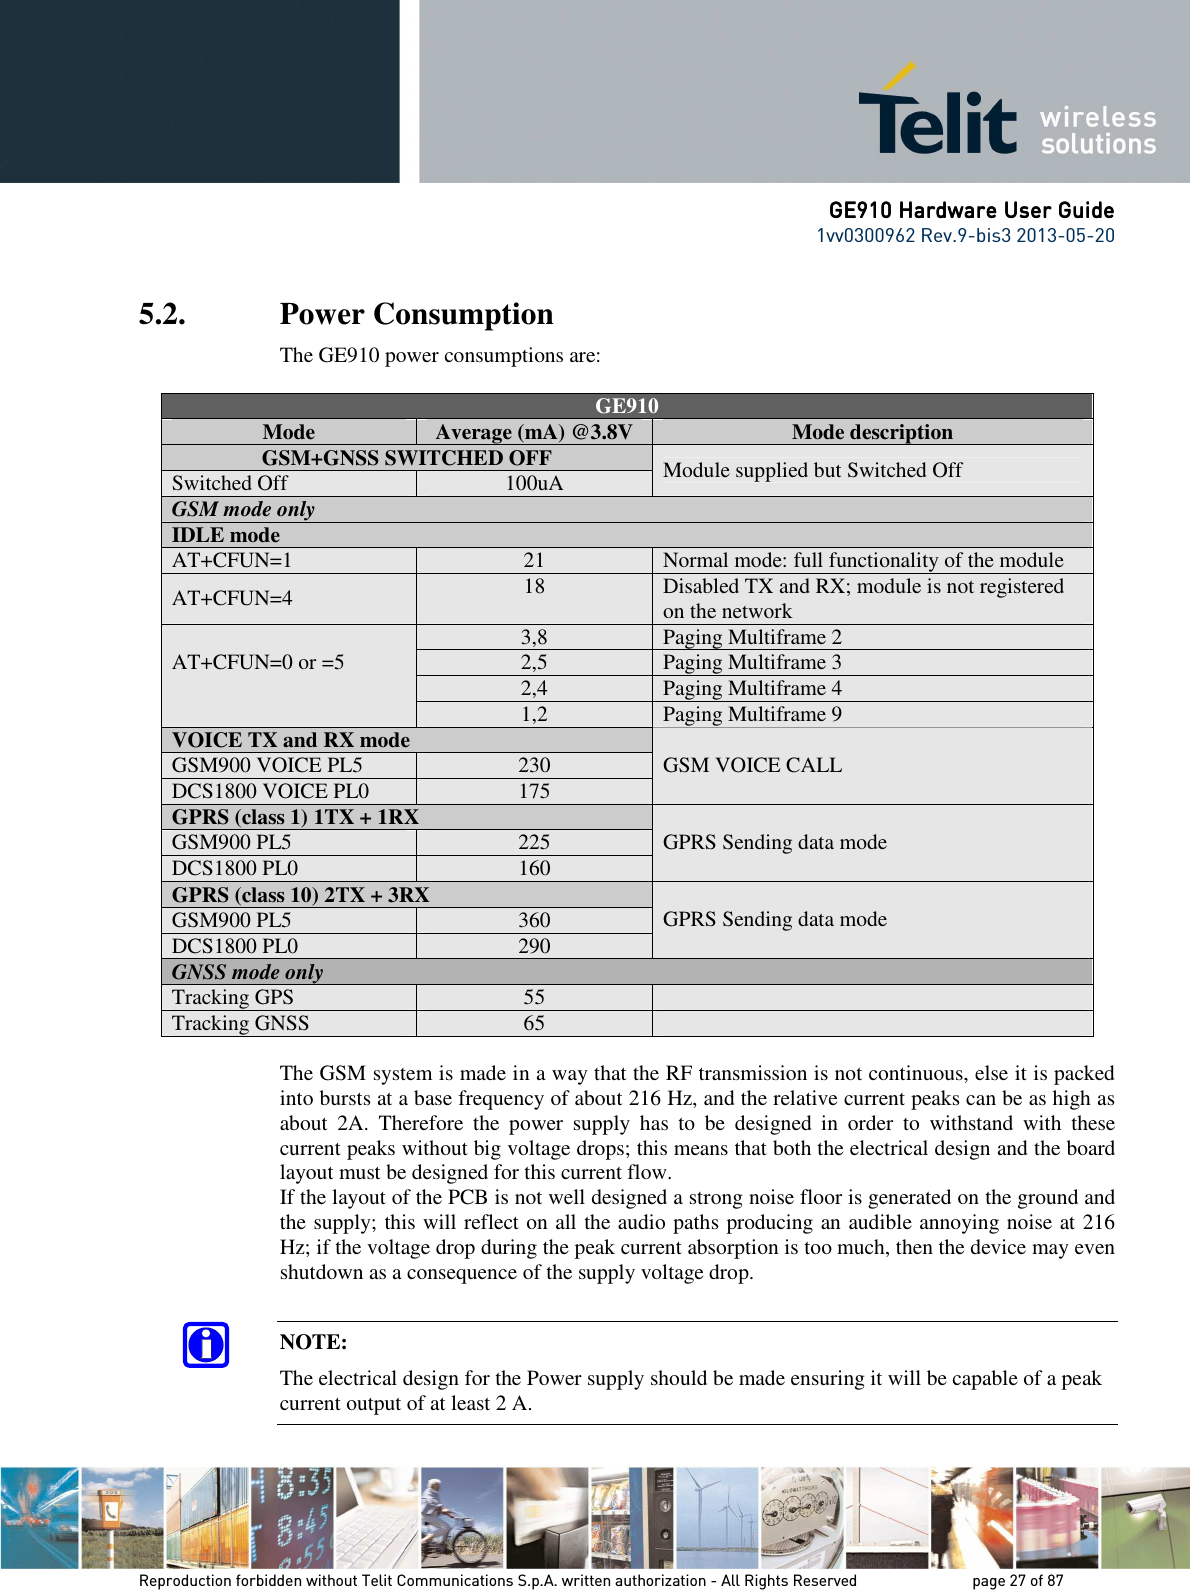      GE910 Hardware User GuideGE910 Hardware User GuideGE910 Hardware User GuideGE910 Hardware User Guide    1vv0300962 Rev.9-bis3 2013-05-20   Reproduction forbidden without Telit Communications S.p.A. written authorization - All Rights Reserved    page 27 of 87 Mod. 0805 2011-07 Rev.2 5.2. Power Consumption The GE910 power consumptions are:   GE910 Mode  Average (mA) @3.8V  Mode description GSM+GNSS SWITCHED OFF Switched Off  100uA  Module supplied but Switched Off GSM mode only                              IDLE mode                              AT+CFUN=1  21  Normal mode: full functionality of the module AT+CFUN=4  18  Disabled TX and RX; module is not registered on the network 3,8  Paging Multiframe 2 2,5  Paging Multiframe 3 2,4  Paging Multiframe 4 AT+CFUN=0 or =5  1,2  Paging Multiframe 9 VOICE TX and RX mode GSM900 VOICE PL5  230 DCS1800 VOICE PL0  175  GSM VOICE CALL GPRS (class 1) 1TX + 1RX GSM900 PL5  225 DCS1800 PL0  160  GPRS Sending data mode GPRS (class 10) 2TX + 3RX GSM900 PL5  360 DCS1800 PL0  290 GPRS Sending data mode GNSS mode only Tracking GPS  55   Tracking GNSS  65    The GSM system is made in a way that the RF transmission is not continuous, else it is packed into bursts at a base frequency of about 216 Hz, and the relative current peaks can be as high as about  2A.  Therefore  the  power  supply  has  to  be  designed  in  order  to  withstand  with  these current peaks without big voltage drops; this means that both the electrical design and the board layout must be designed for this current flow. If the layout of the PCB is not well designed a strong noise floor is generated on the ground and the supply; this will reflect on all the audio paths producing an audible annoying noise at 216 Hz; if the voltage drop during the peak current absorption is too much, then the device may even shutdown as a consequence of the supply voltage drop.  NOTE: The electrical design for the Power supply should be made ensuring it will be capable of a peak current output of at least 2 A. 